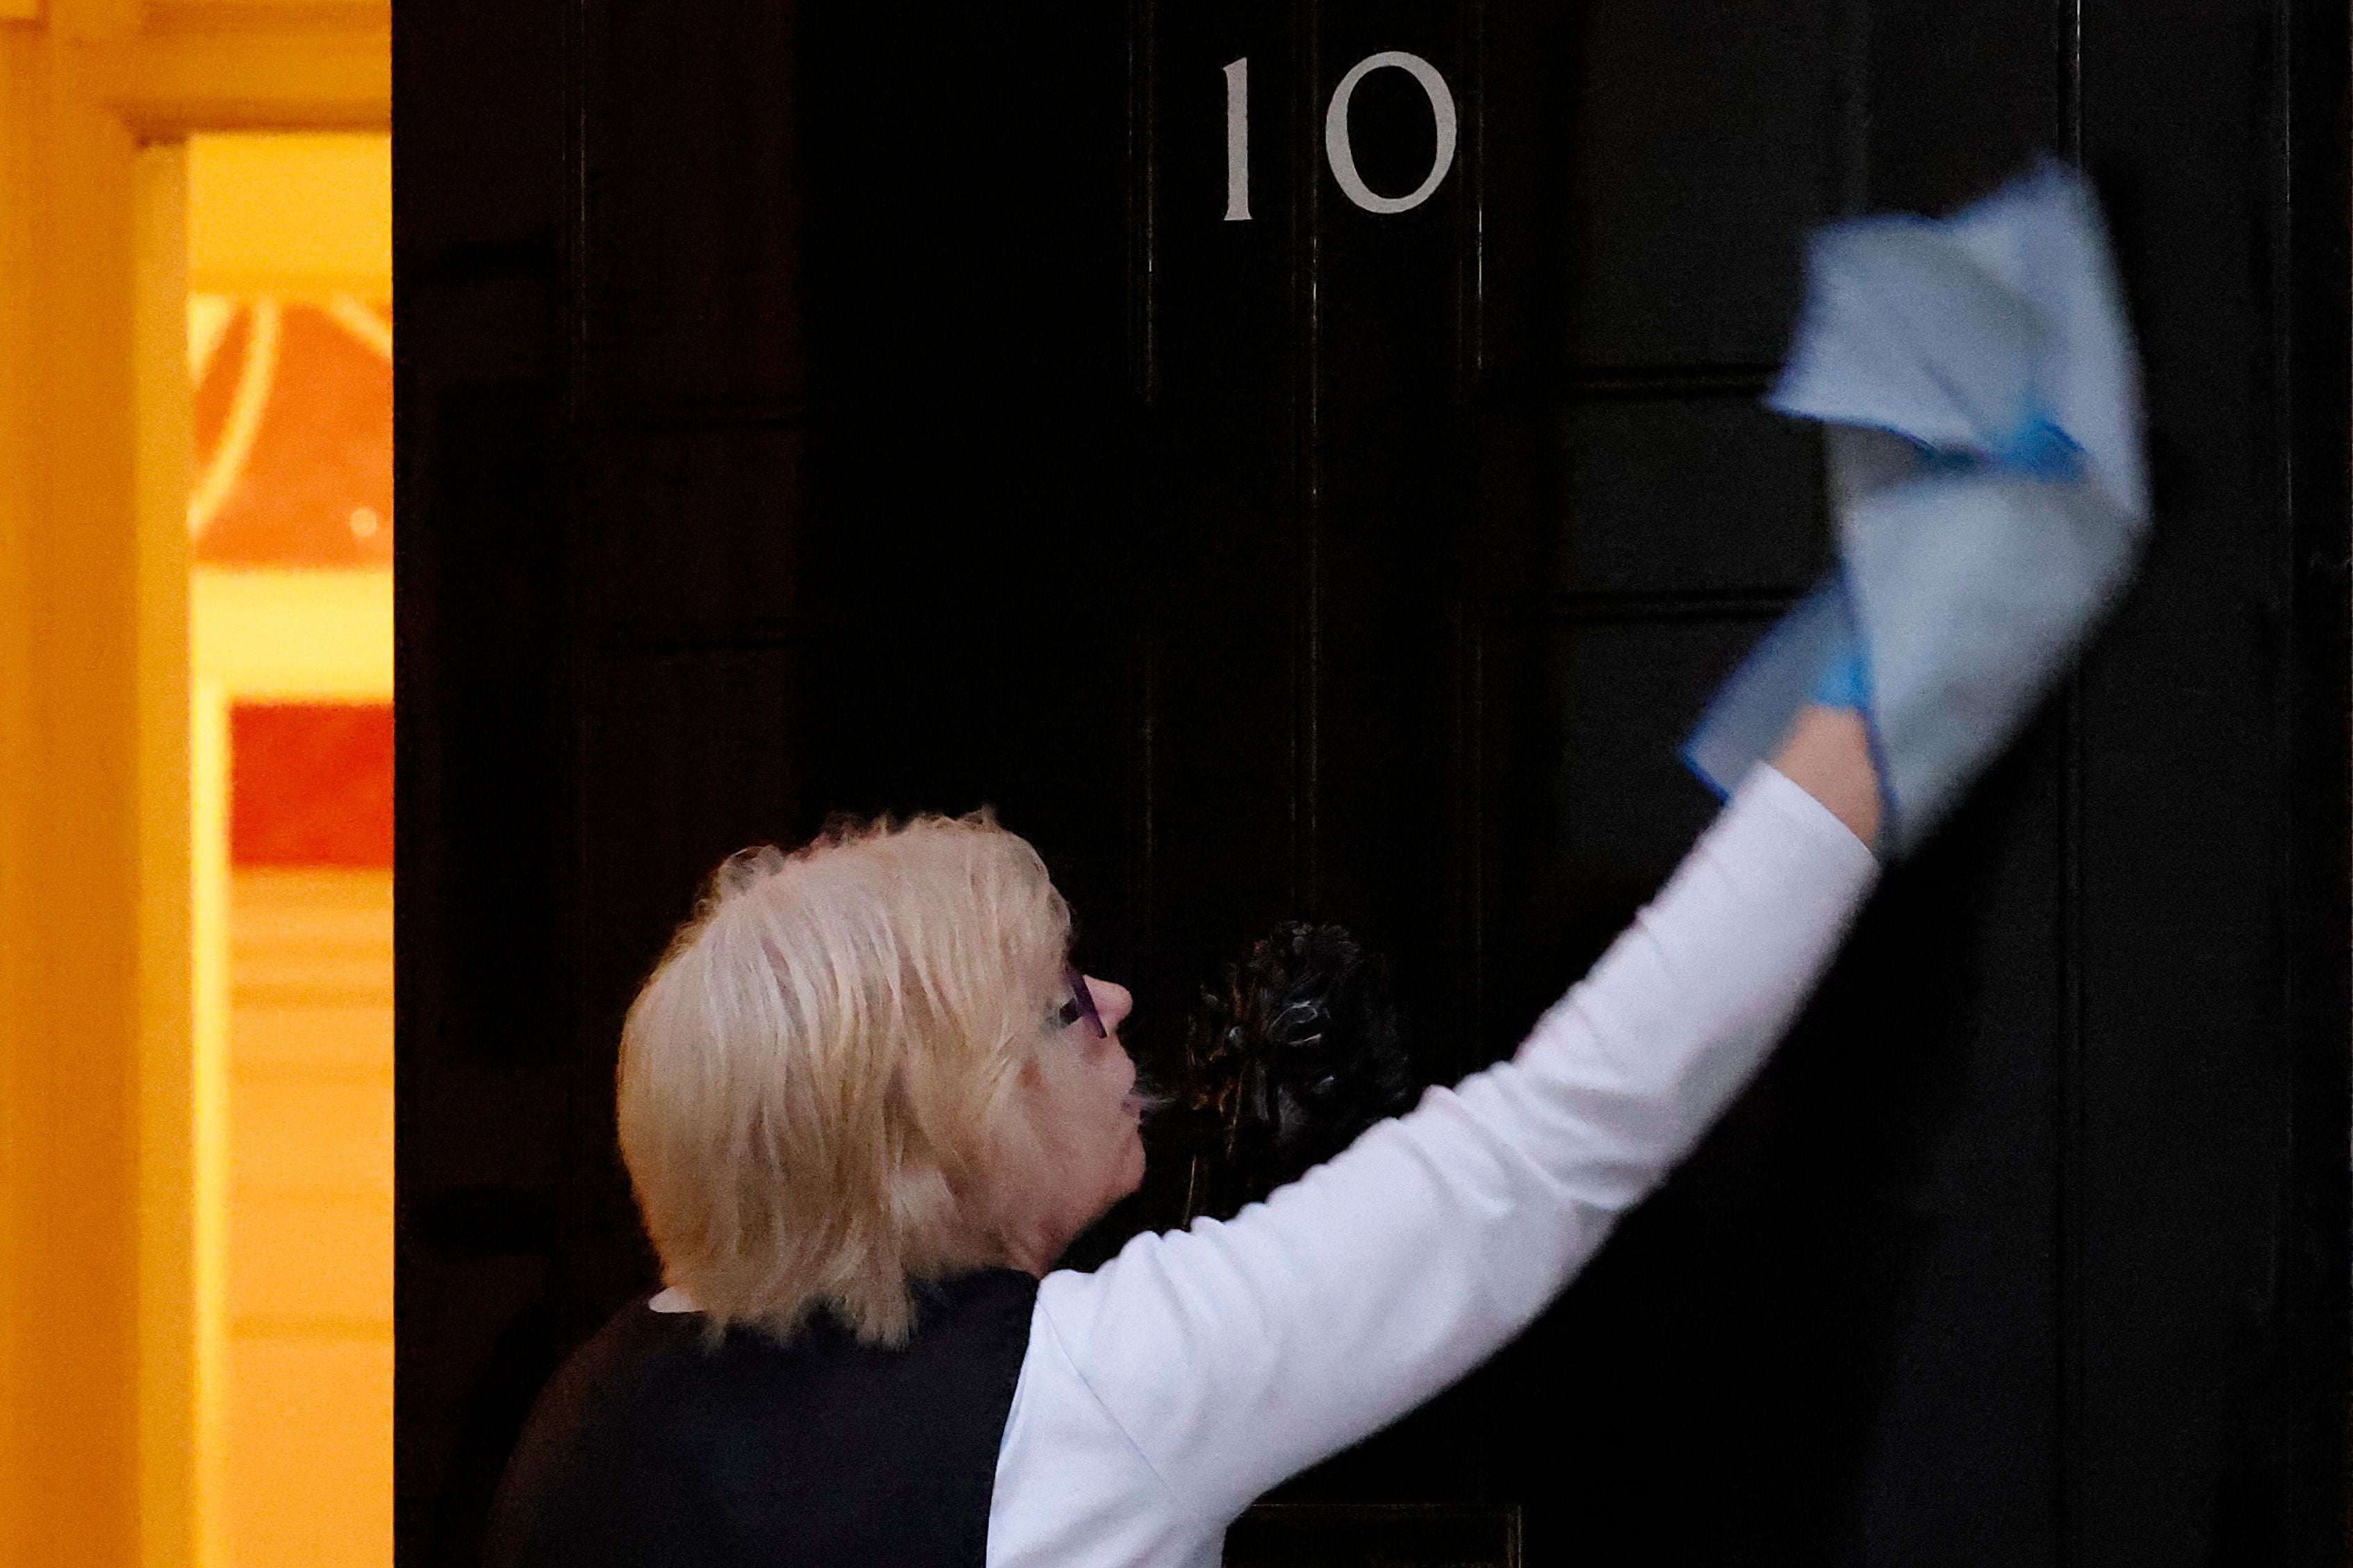 A ‘culture of disrespect’ was allowed to proliferate inside No 10